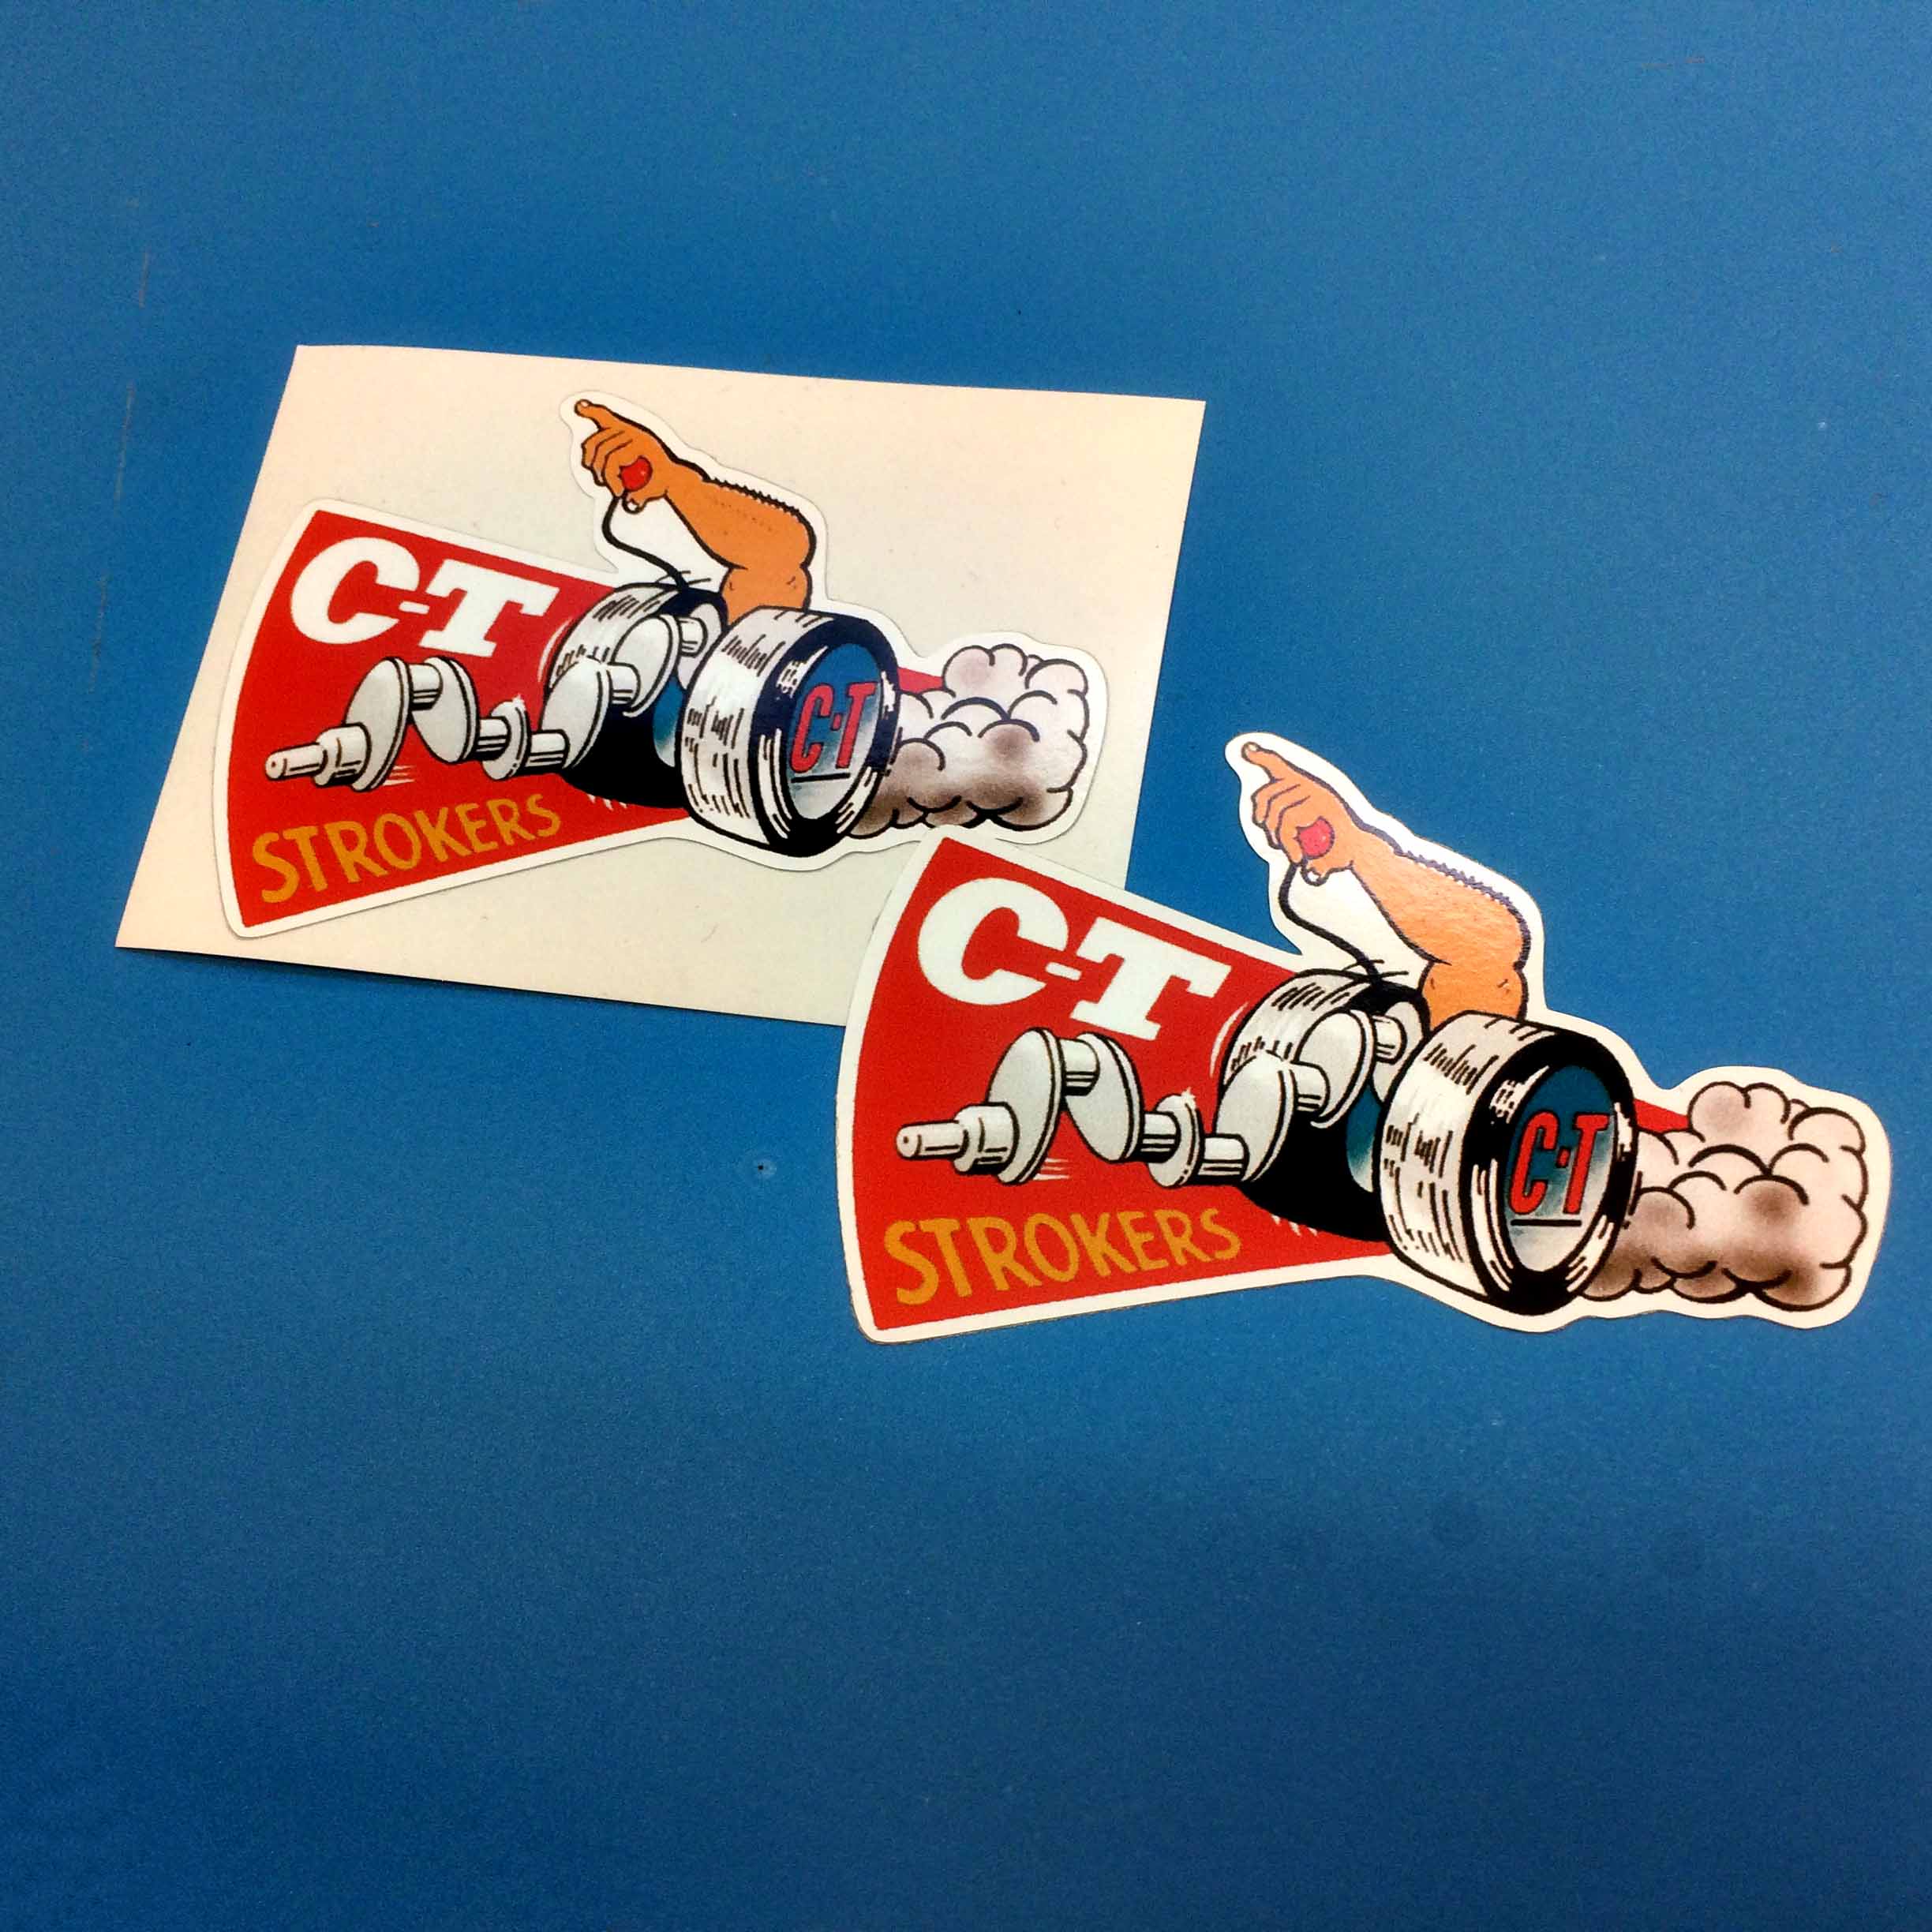 CT STROKERS STICKERS. C-T in white lettering Strokers in yellow lettering on a red background next to a dragster with smoke coming from the back and a man's arm rising up between the wheels.